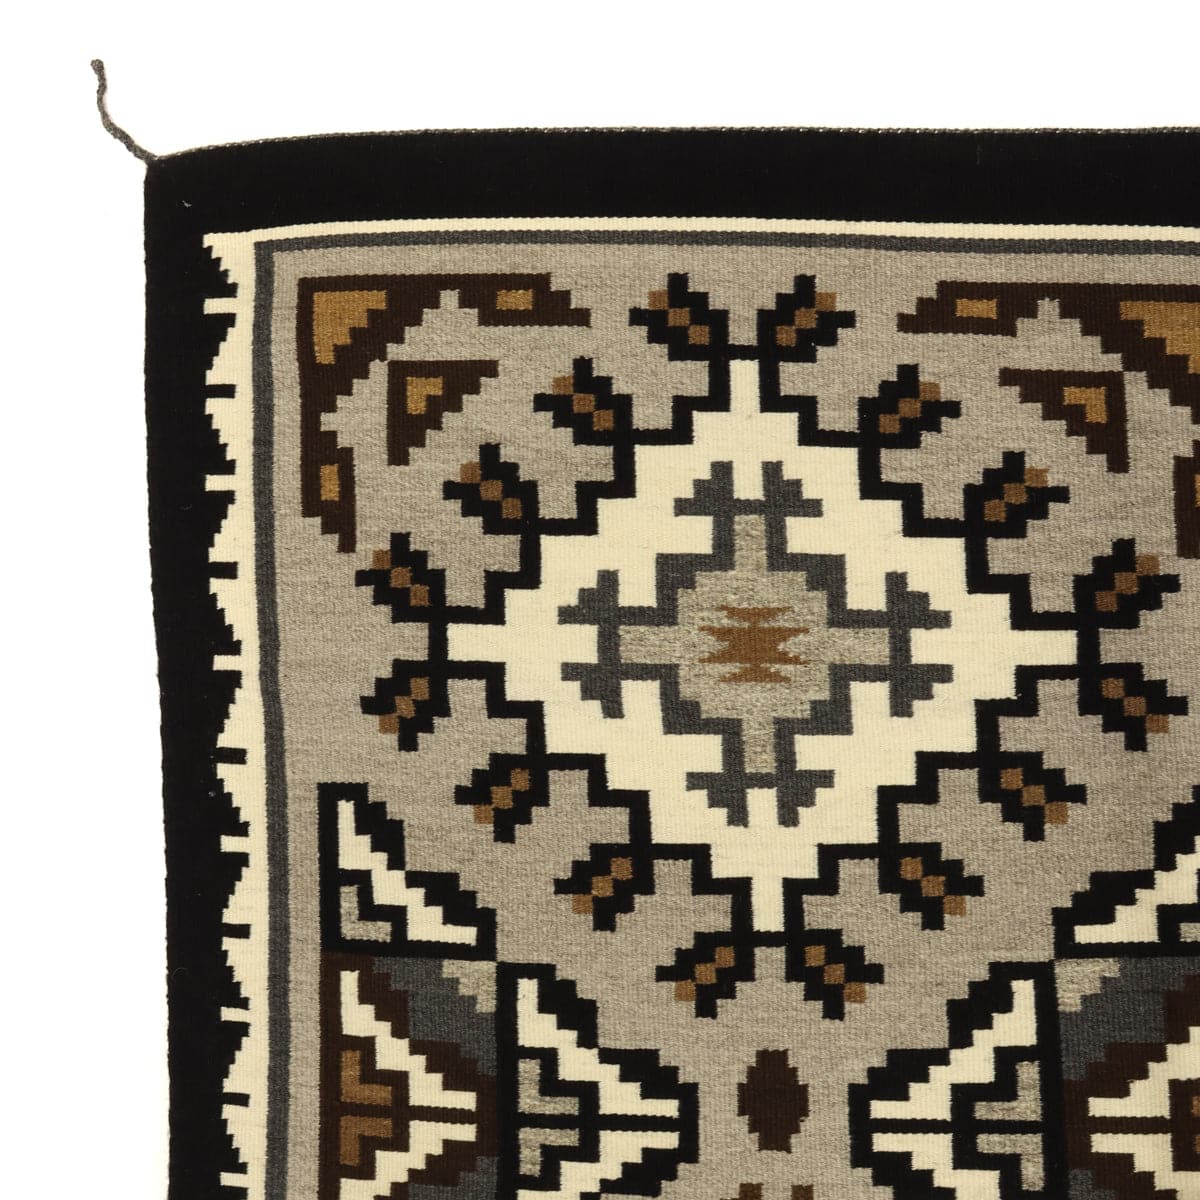 Lorraine Taylor - Navajo Two Grey Hills Rug, Contemporary, 47" x 28" DONATION WILL BE MADE TO BLESSINGWAY (T92308-0314-015) 3